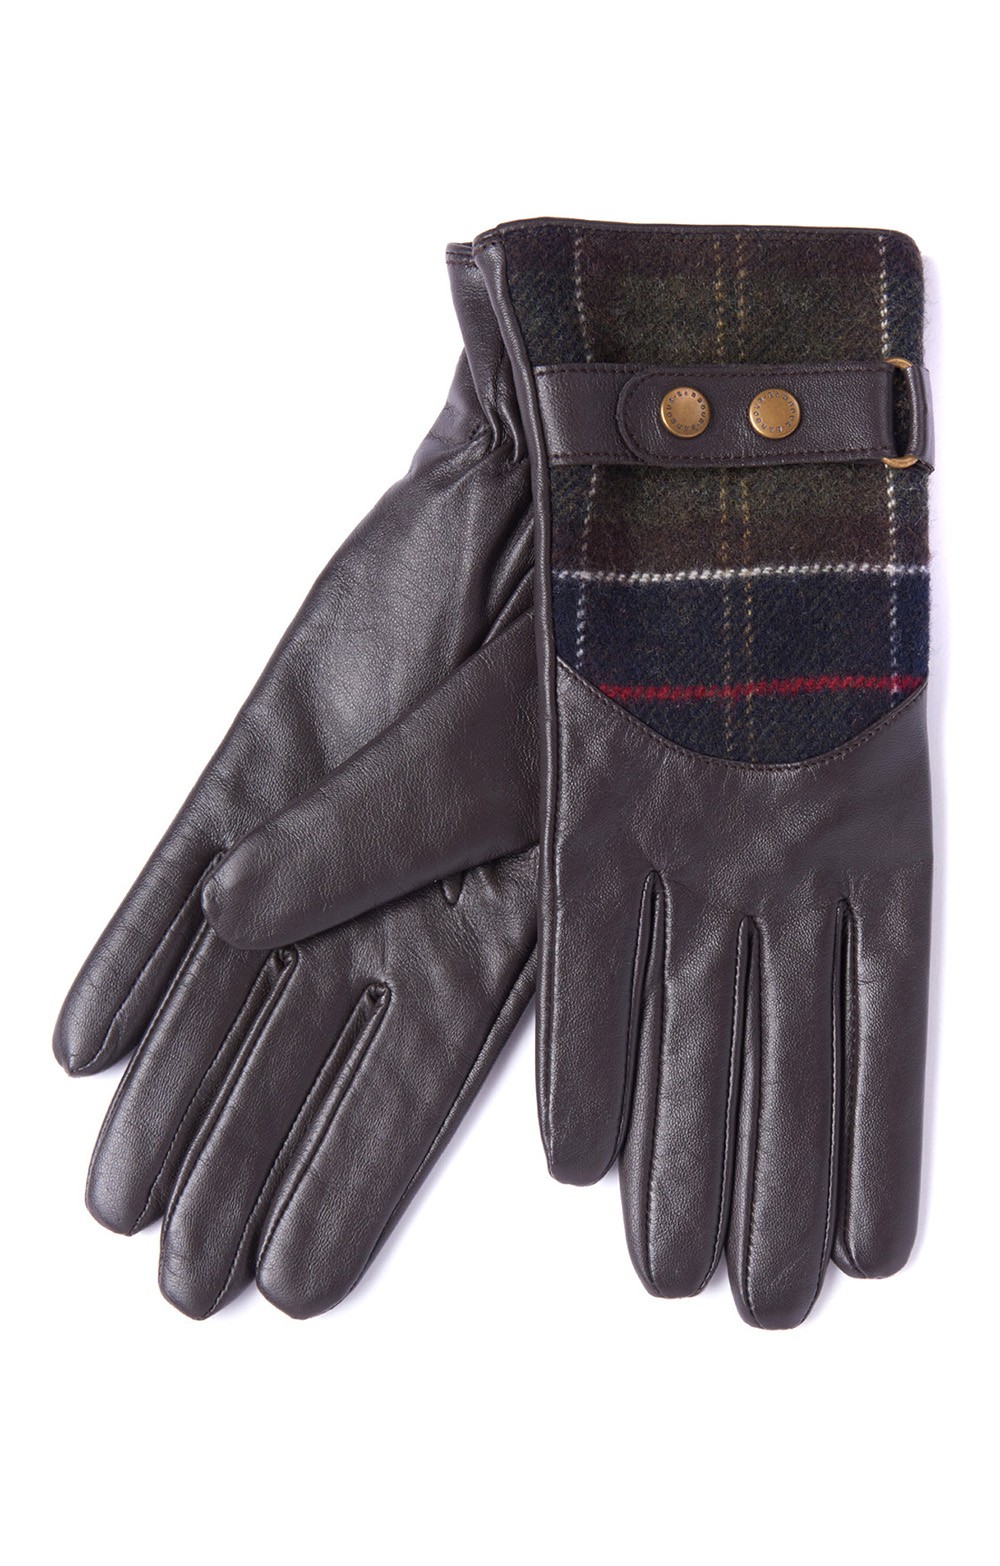 barbour womens mittens